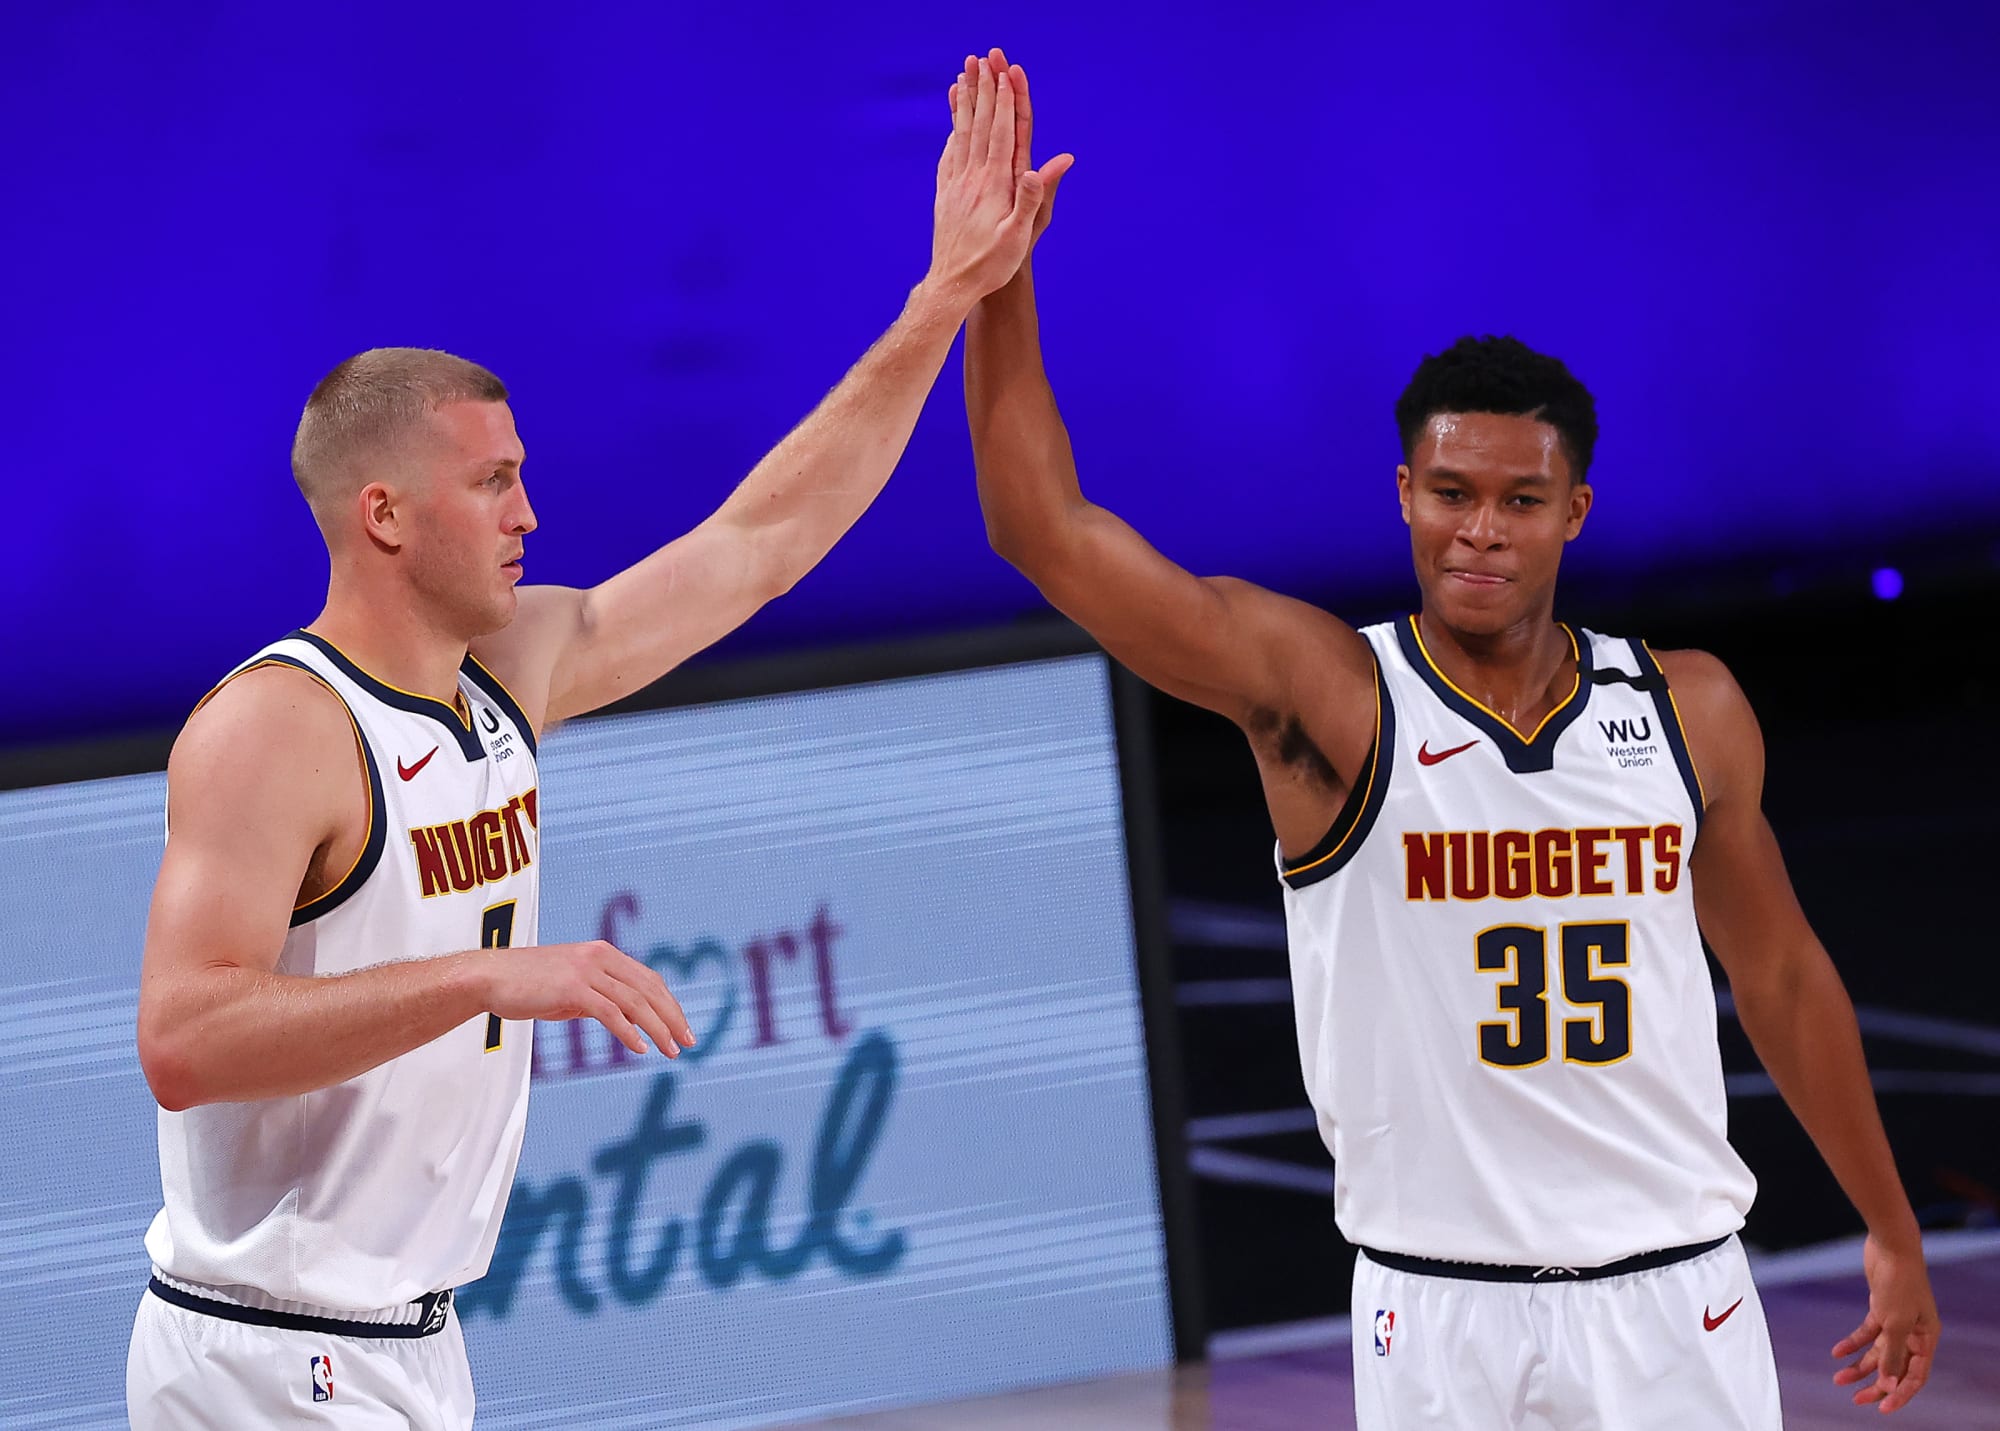 Nuggets sign P.J. Dozier to multi-year contract